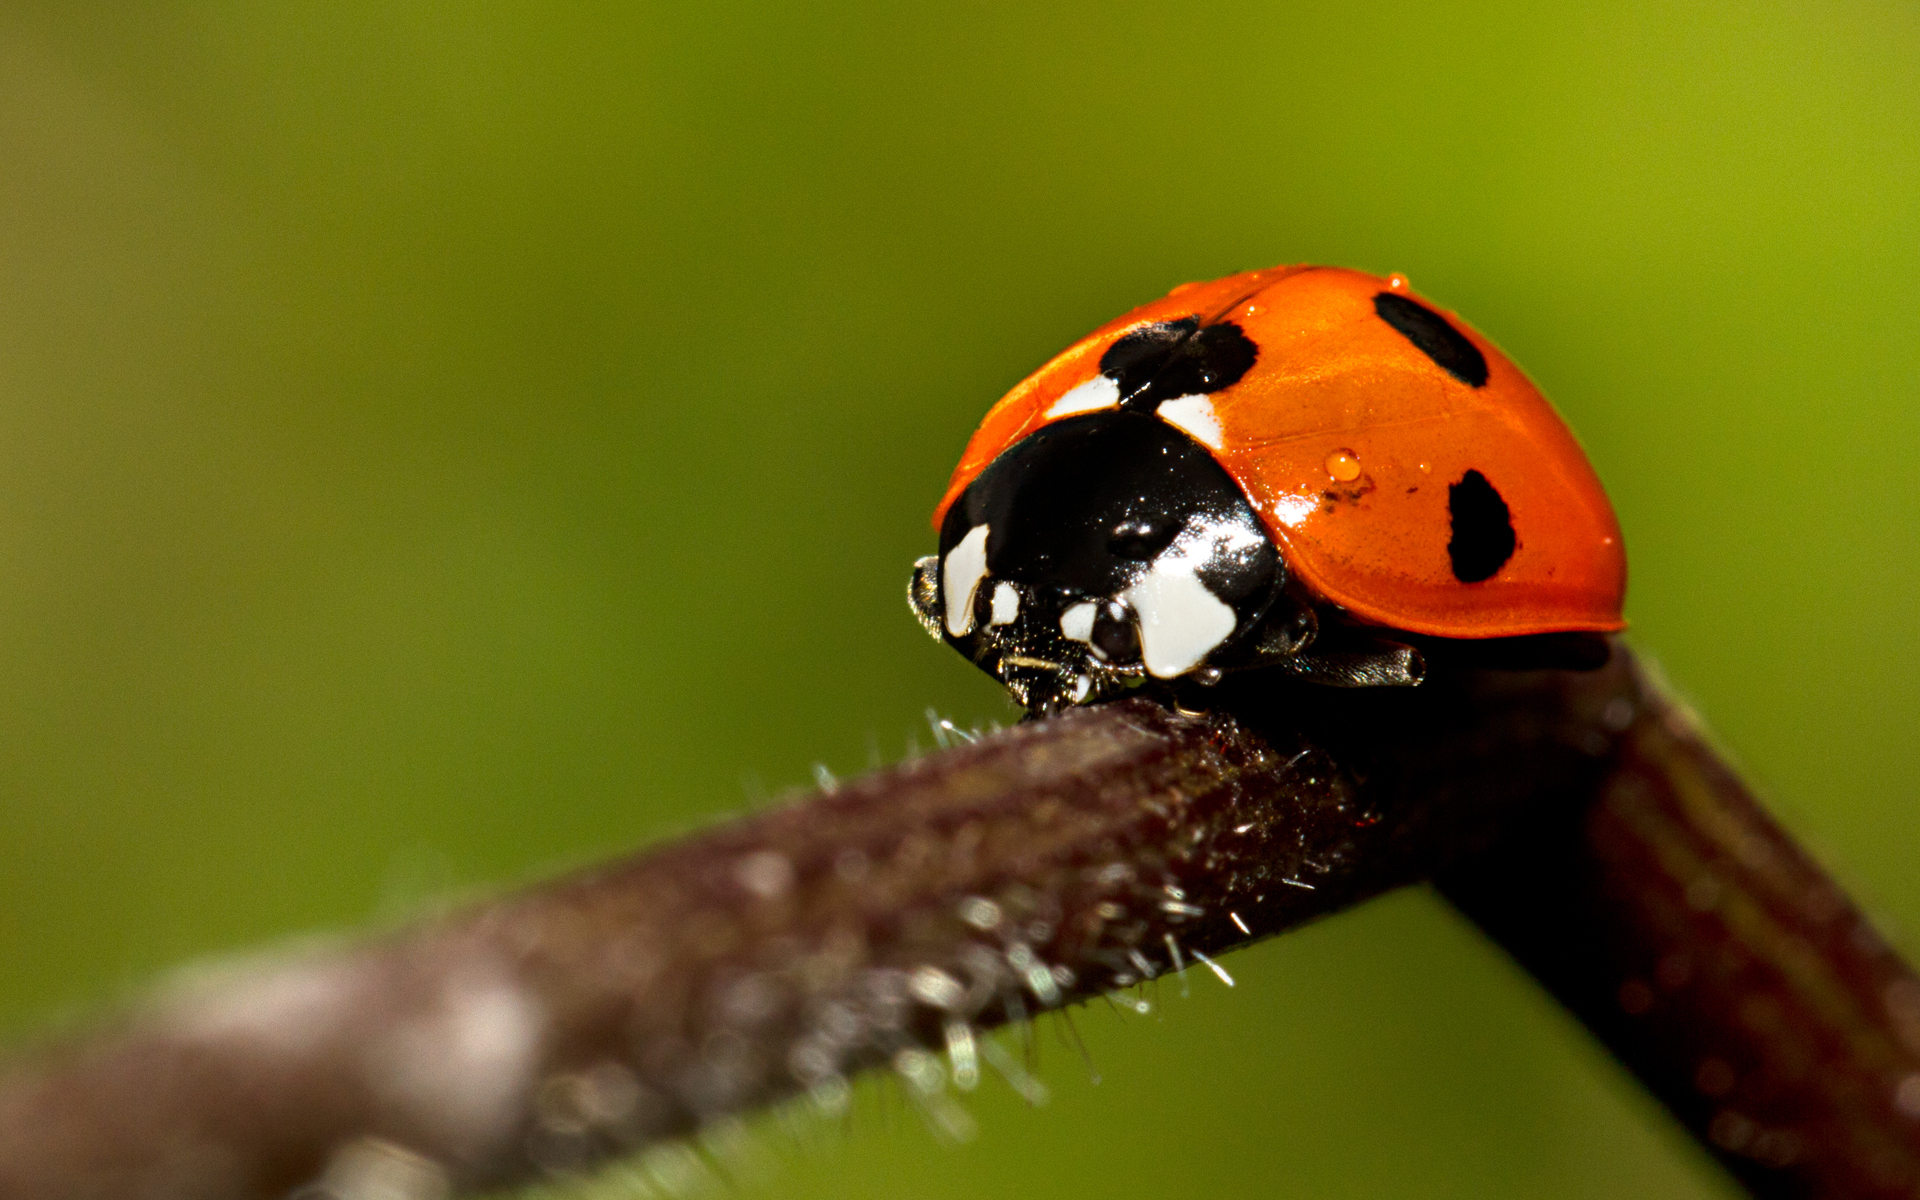 Ladybug Wallpapers Pictures Images HD Wallpapers Download Free Map Images Wallpaper [wallpaper684.blogspot.com]